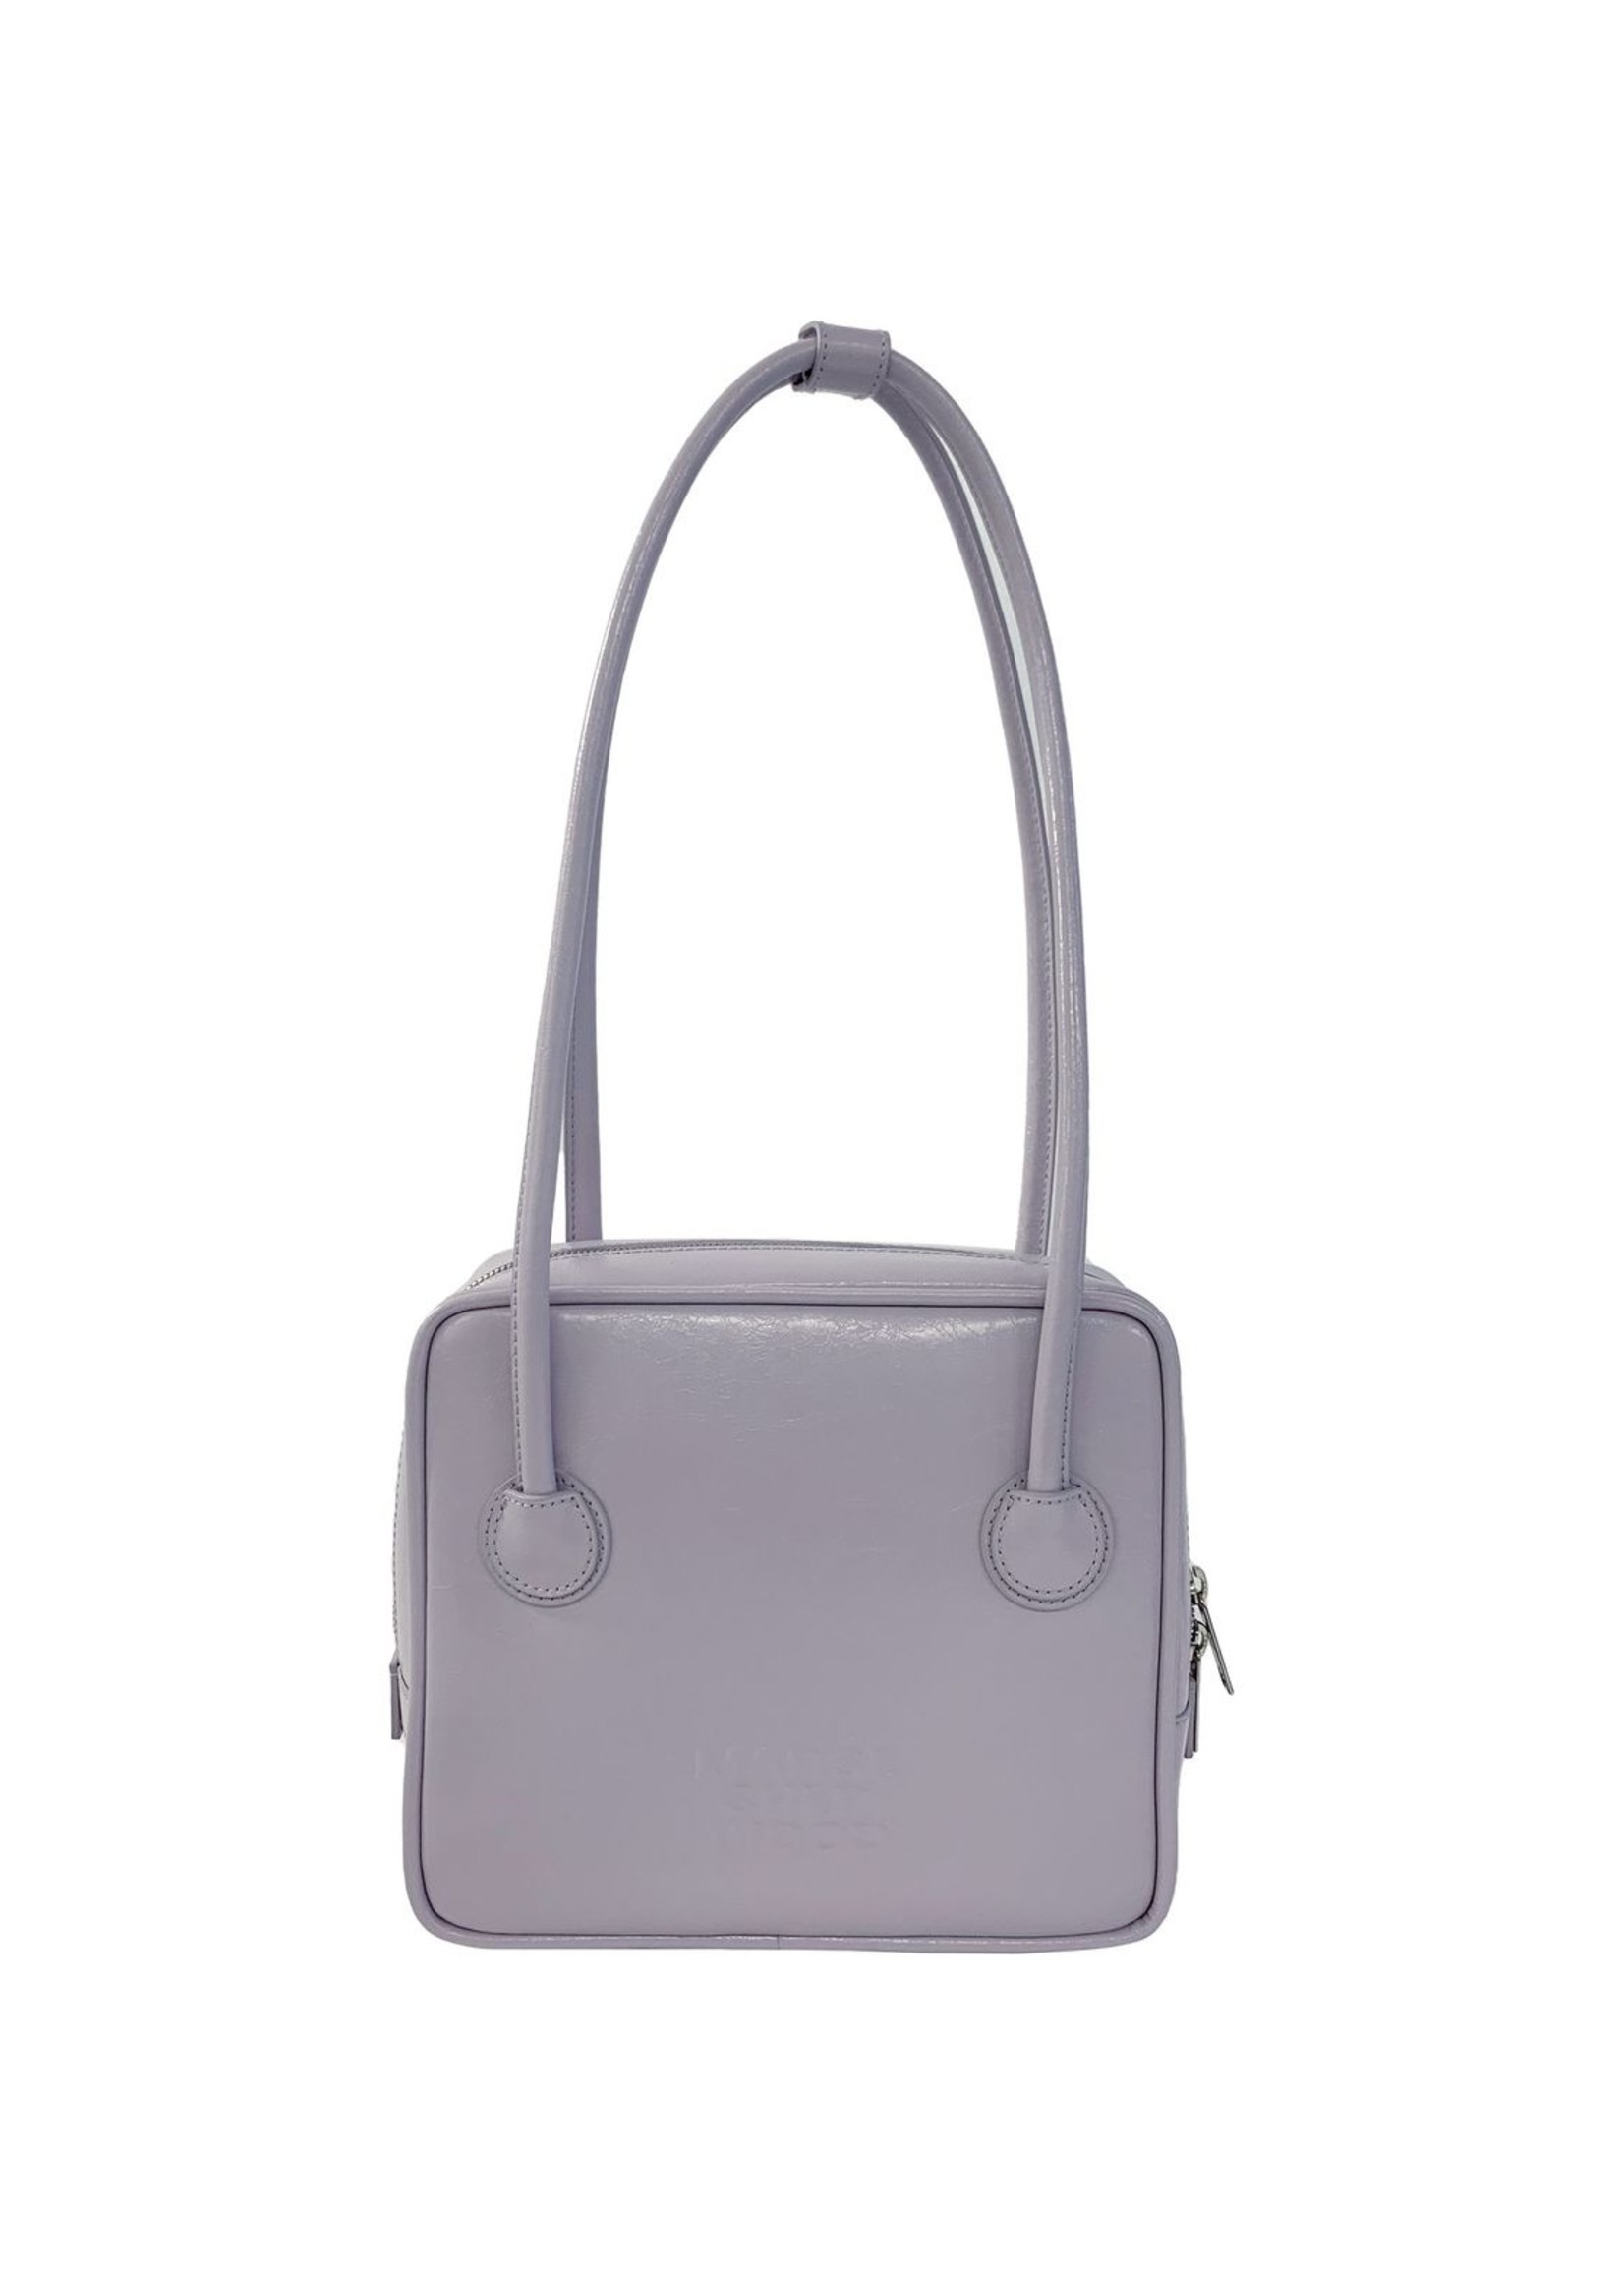 MARGE SHERWOOD Square Shoulder Bag with Piping in Lilac Crinkled Leather